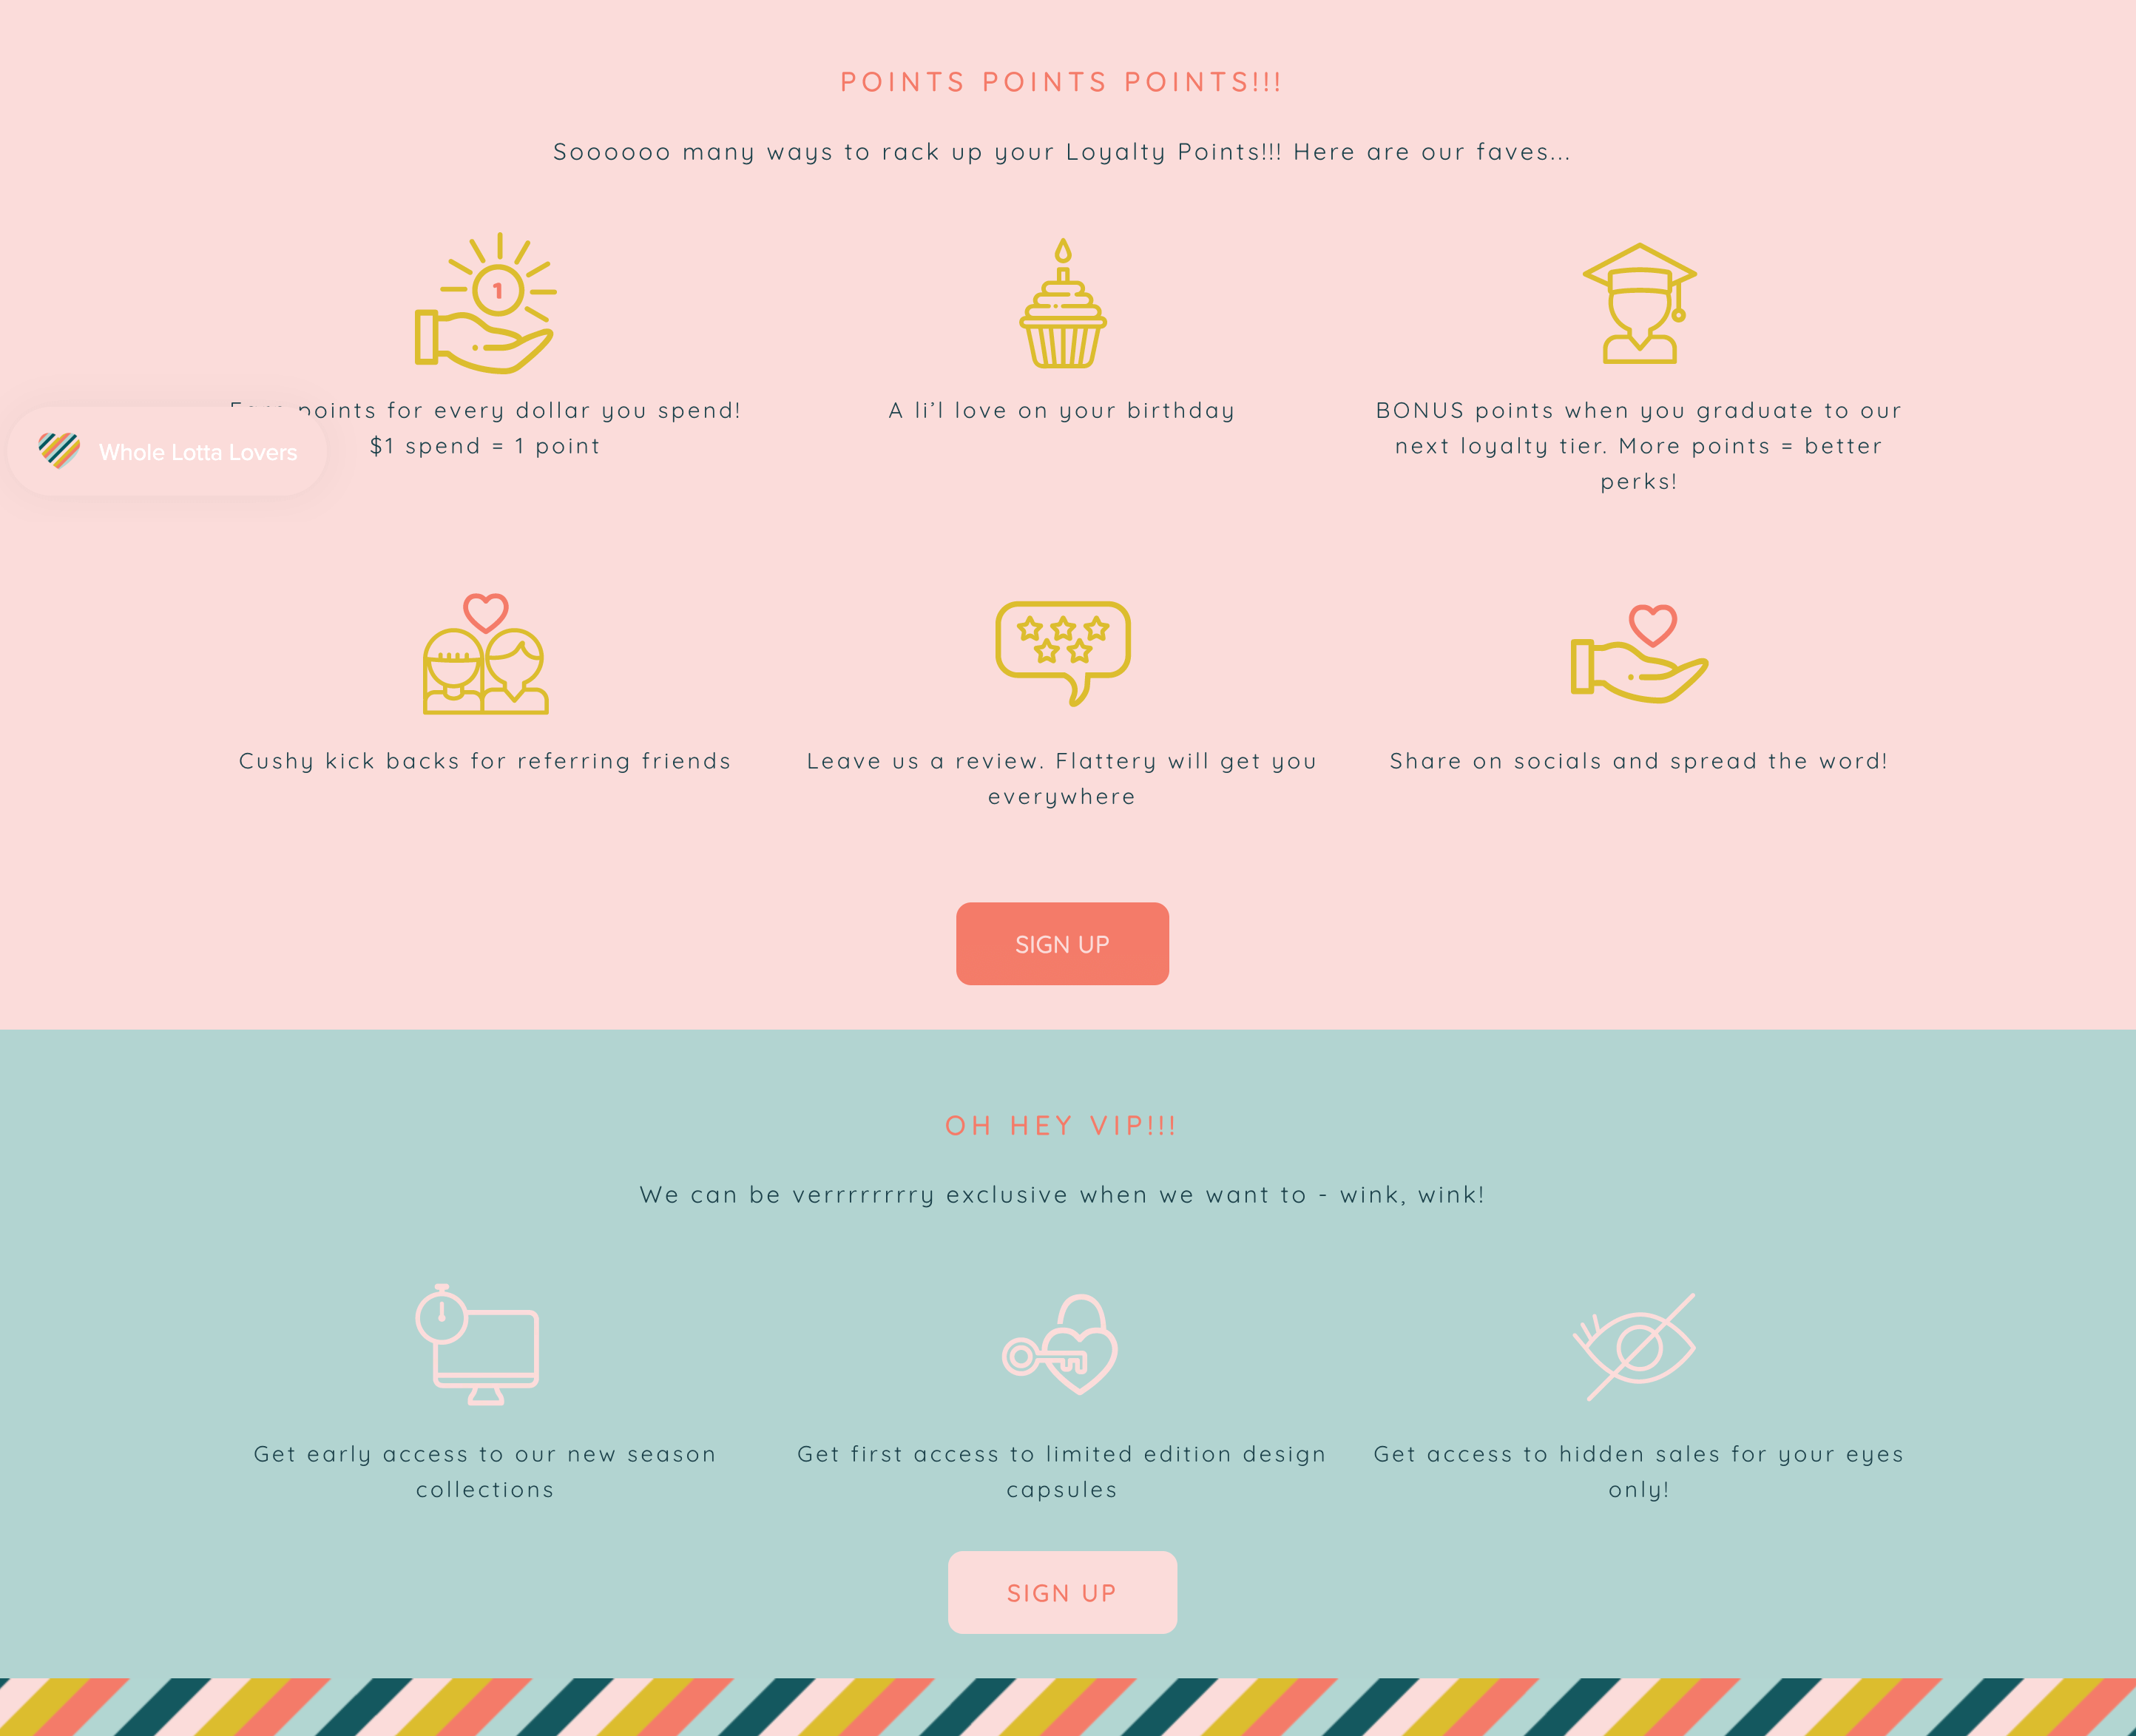 A screenshot from Sage x Clare’s rewards program explainer page showing the ways to earn points and a brief explanation of the VIP program benefits.